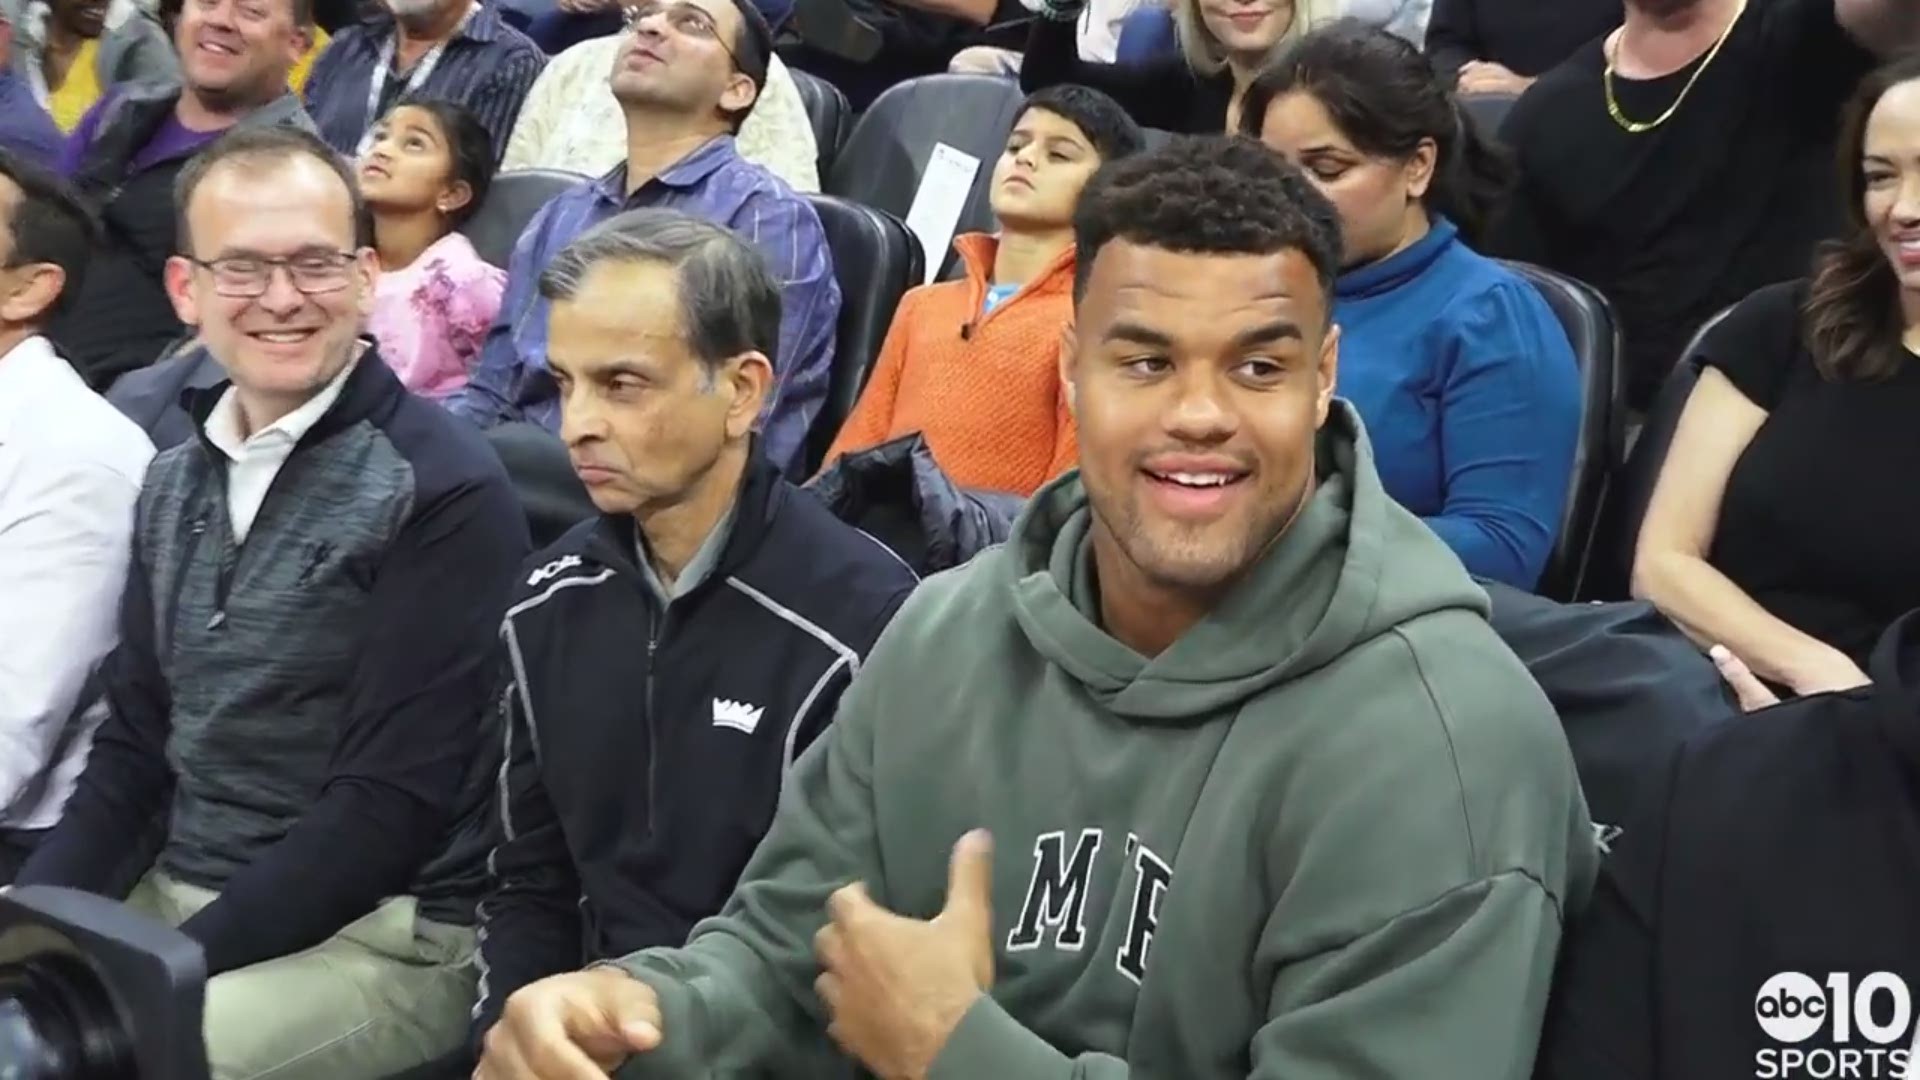 When he's not busy gobbling up QBs for the San Francisco 49ers, NFL defensive end Arik Armstead can be found sitting courtside at a Sacramento Kings game.